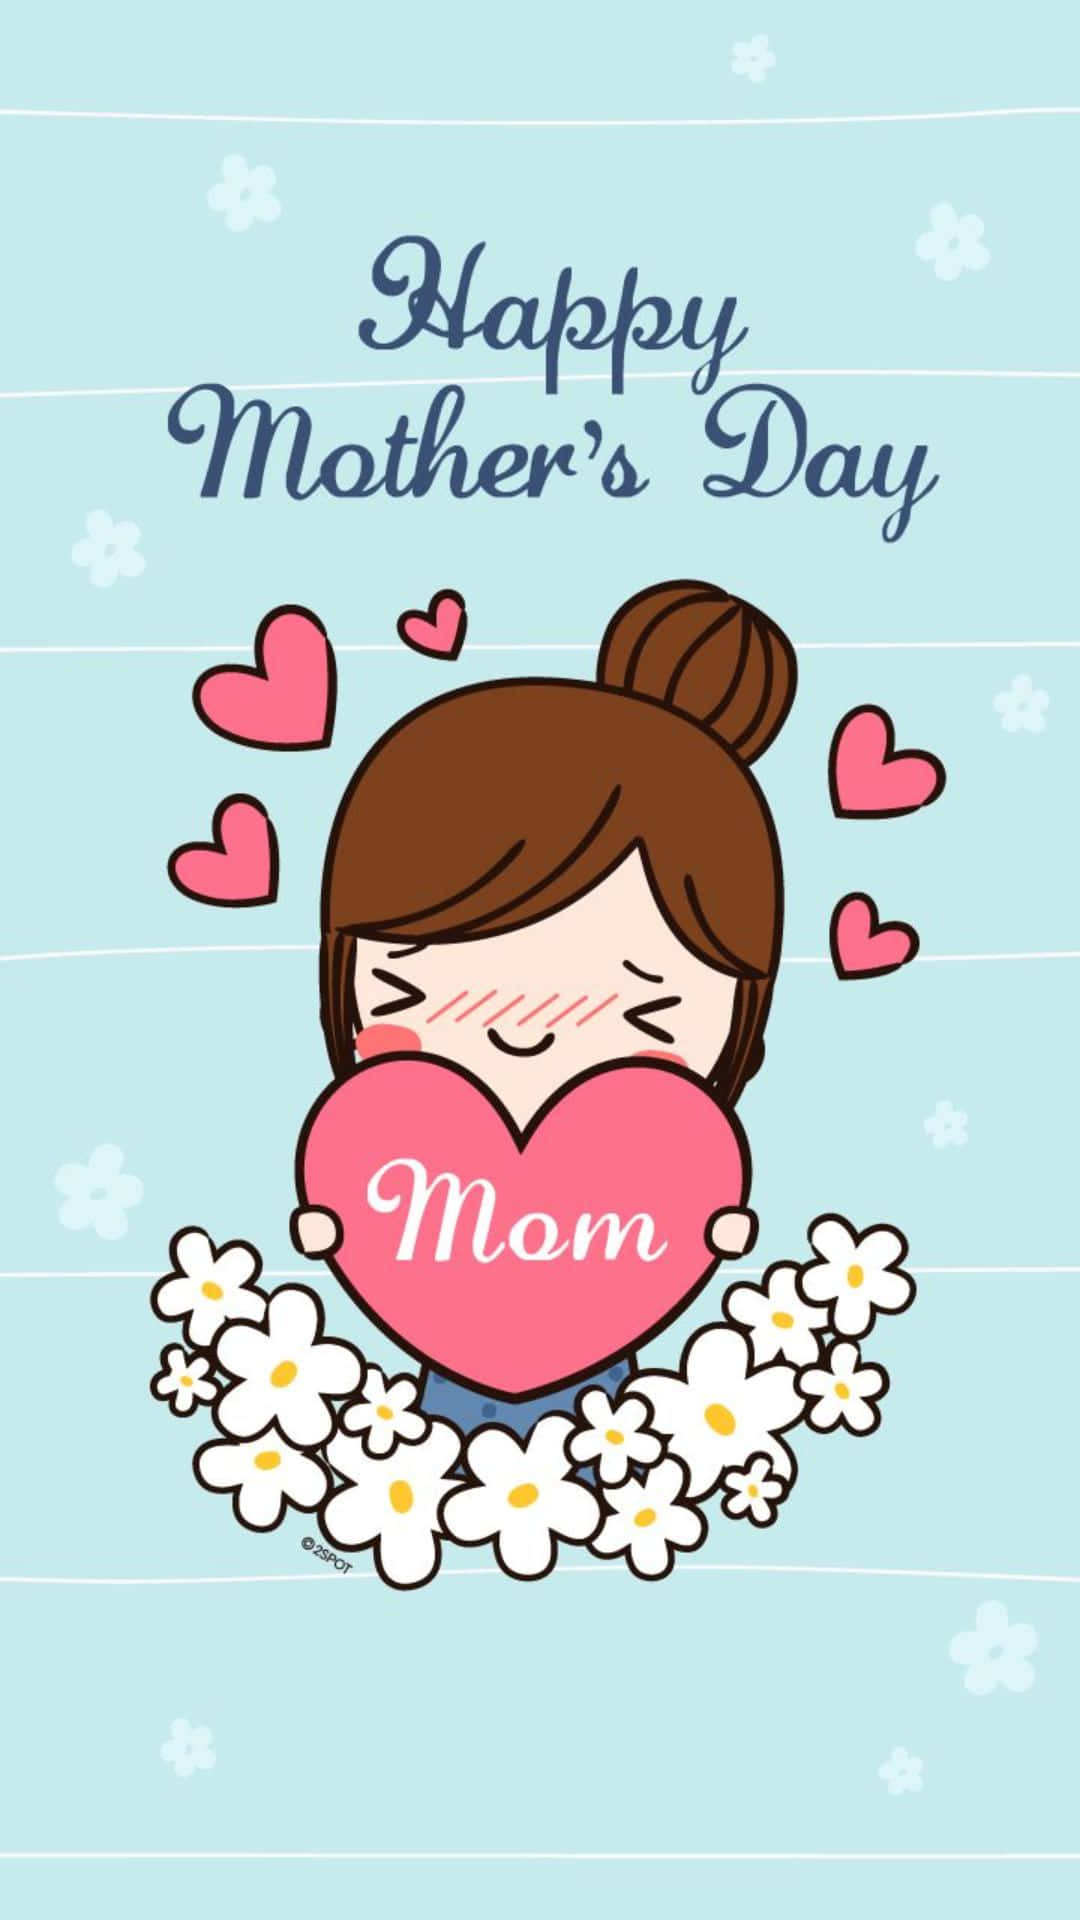 “happy Mother's Day! Sending All The Love From Afar!”